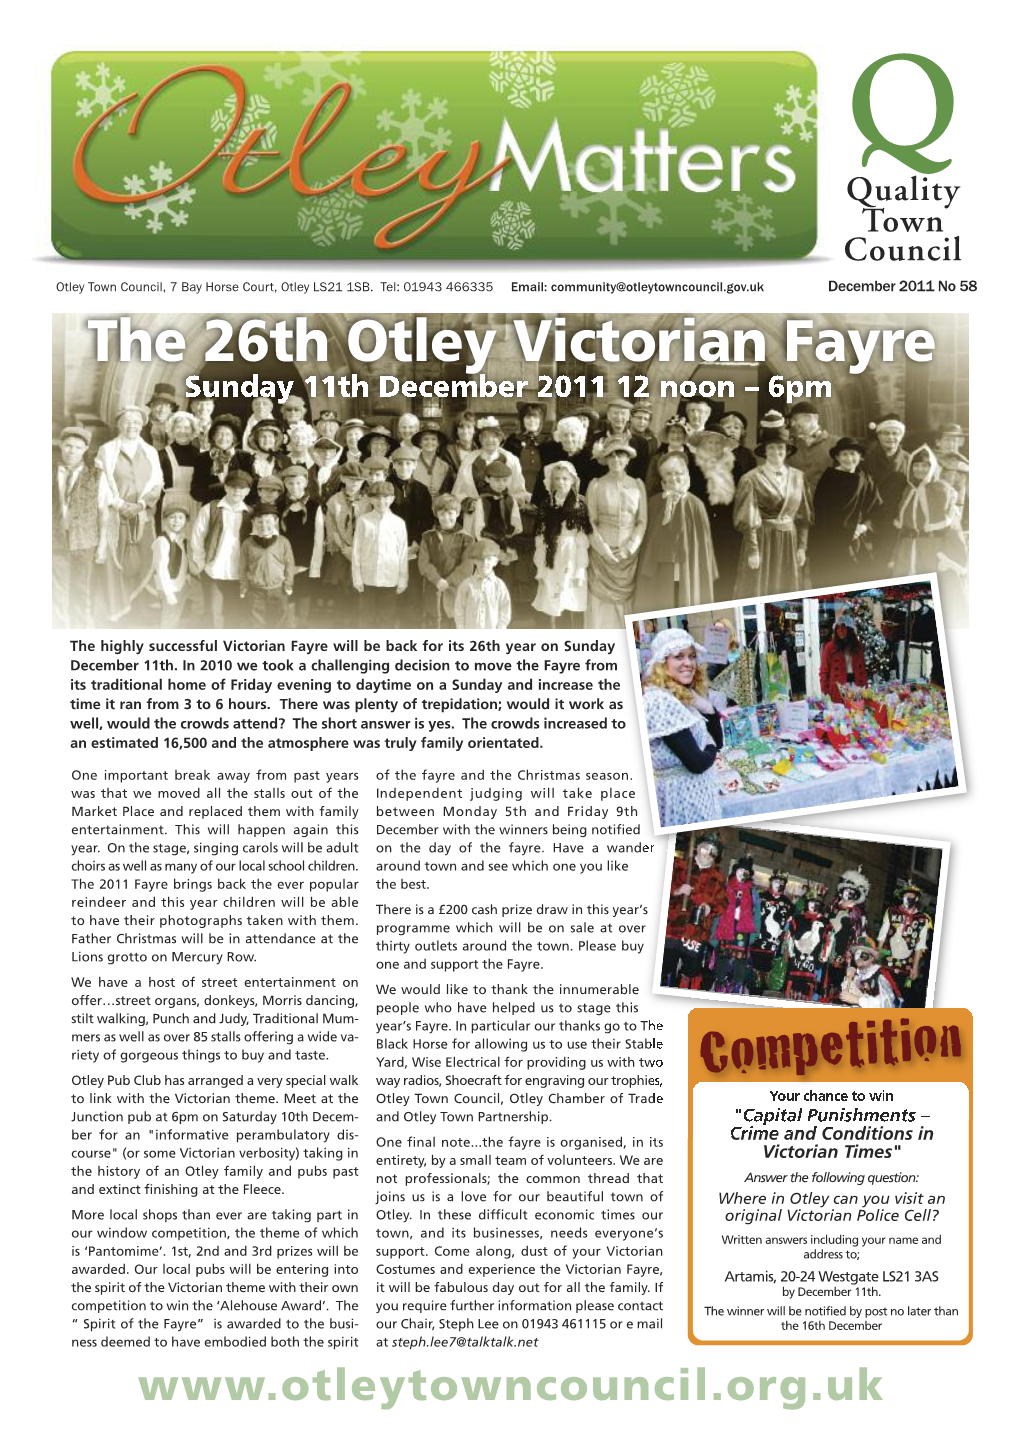 Otley Matters March 2011 No58